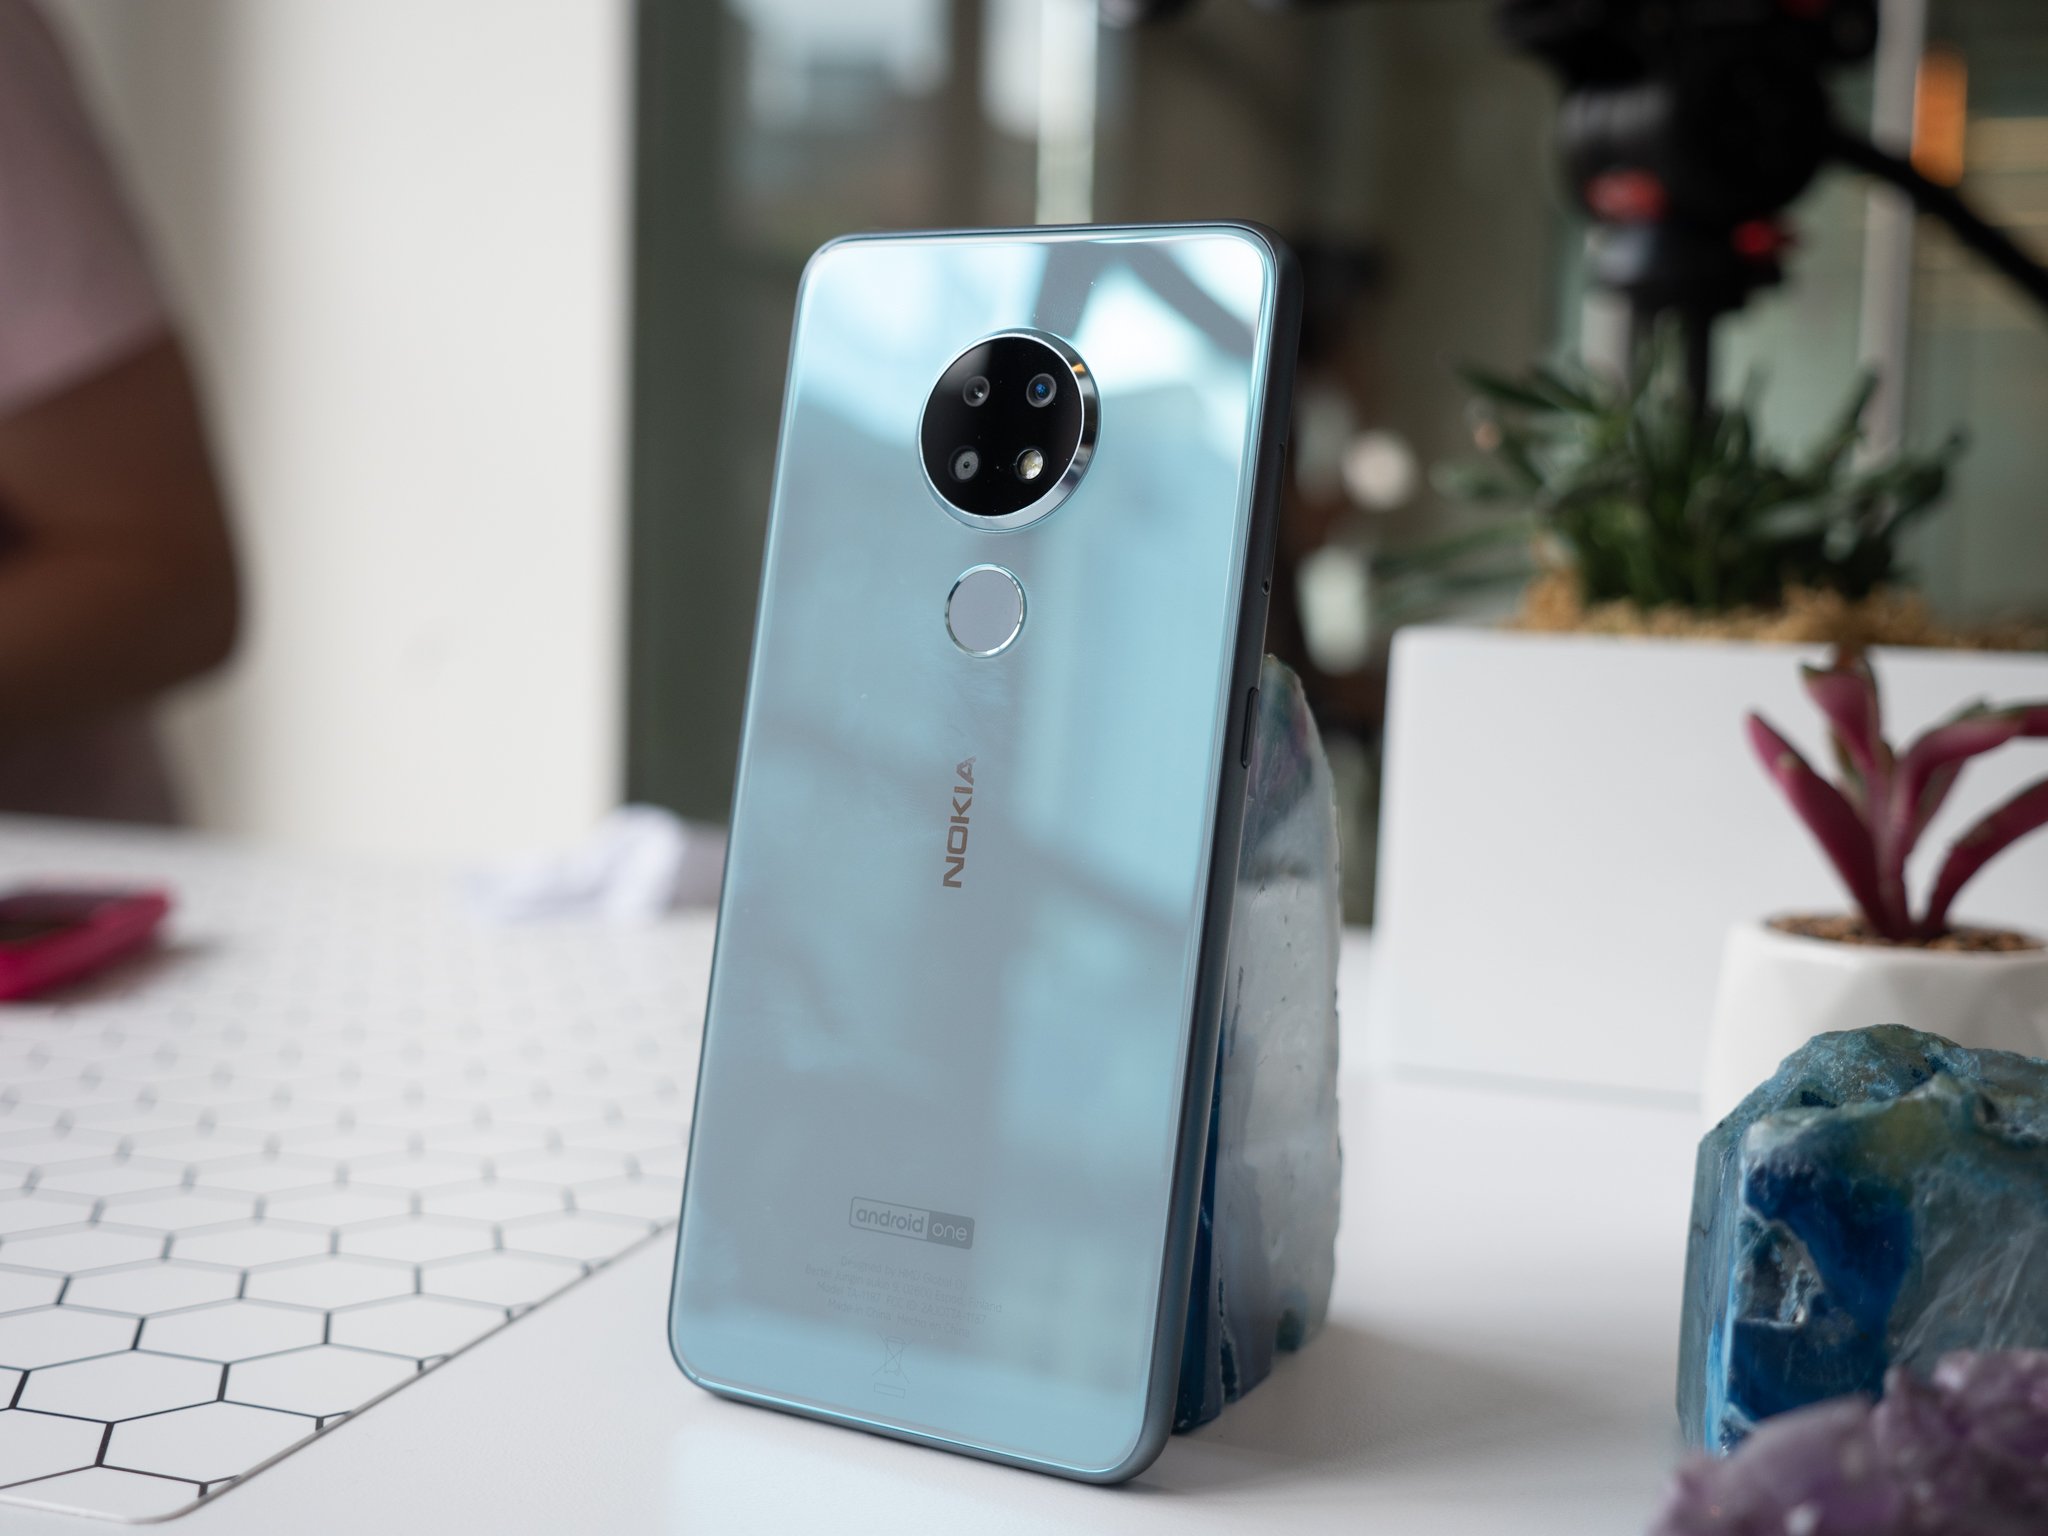 Nokia 6.2 Smartphone in Review: Android One was a great choice for Nokia -   News